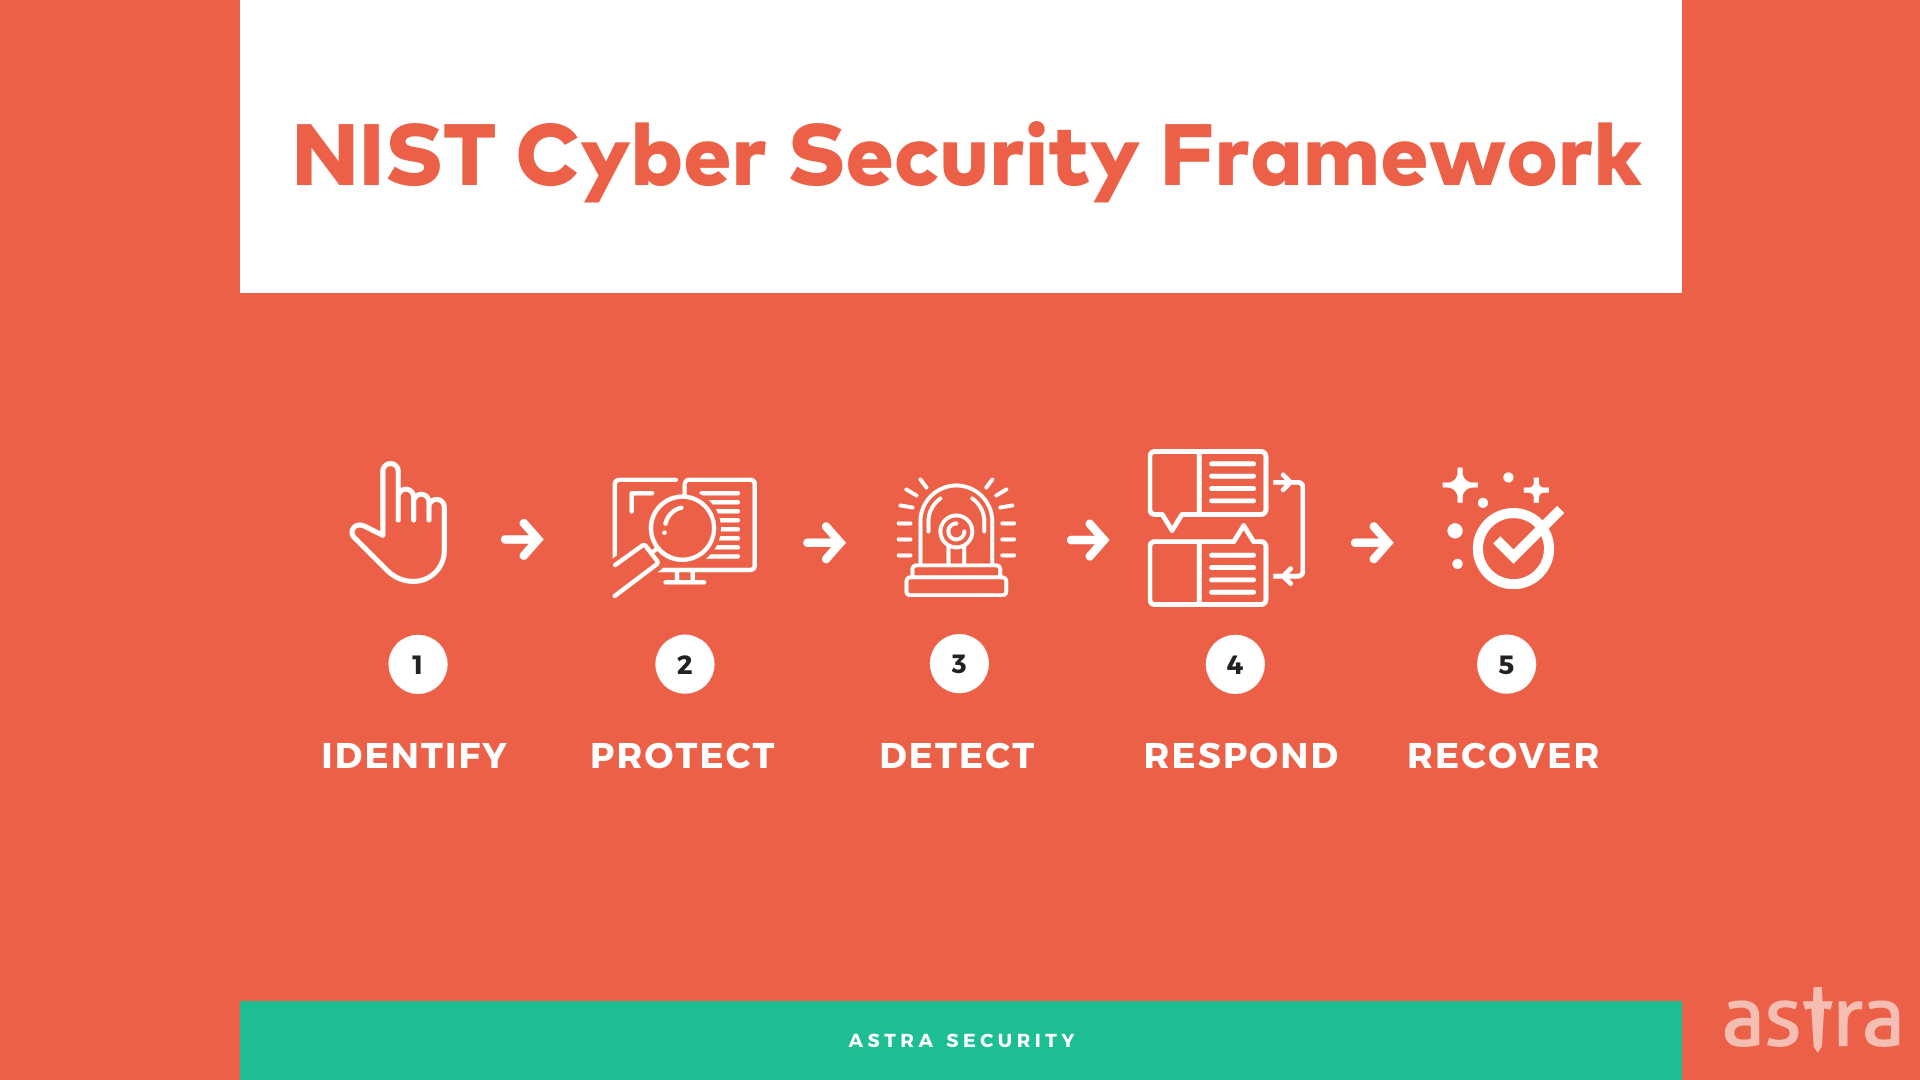 NIST cybersecurity framework functions